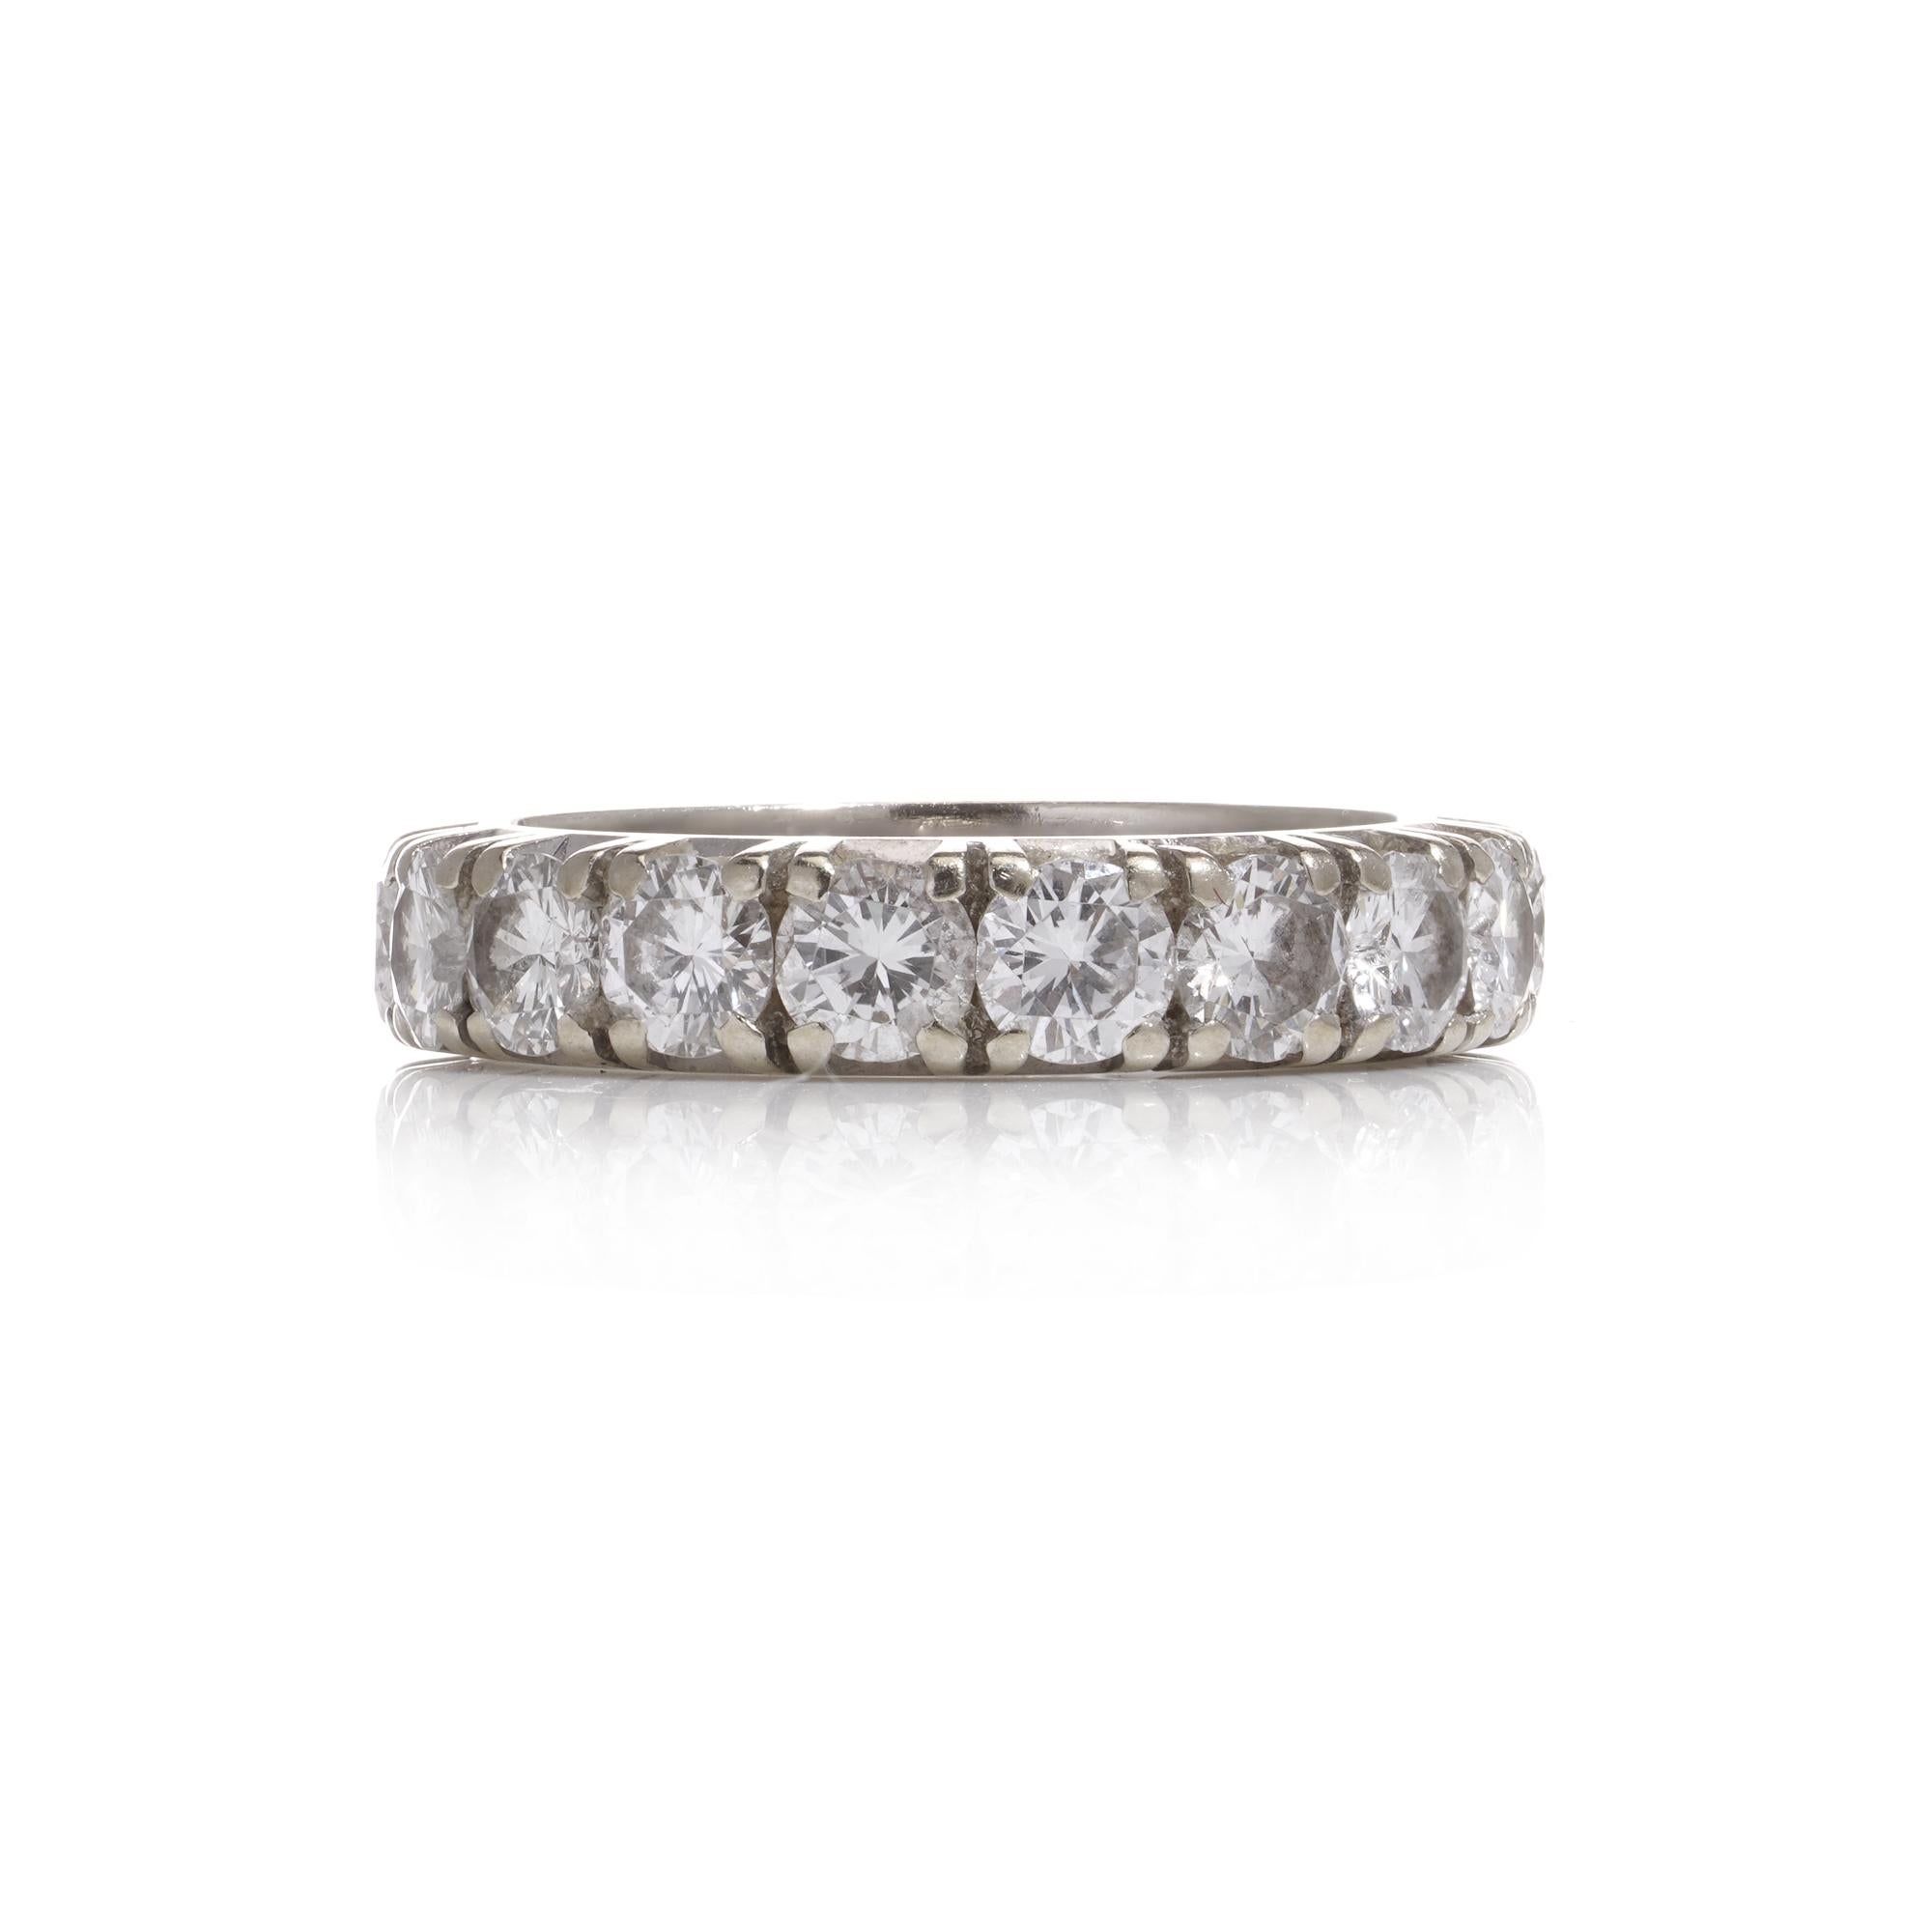 18k Gold Diamond Eternity Band Ring with 3.24 cts. of diamonds  For Sale 2